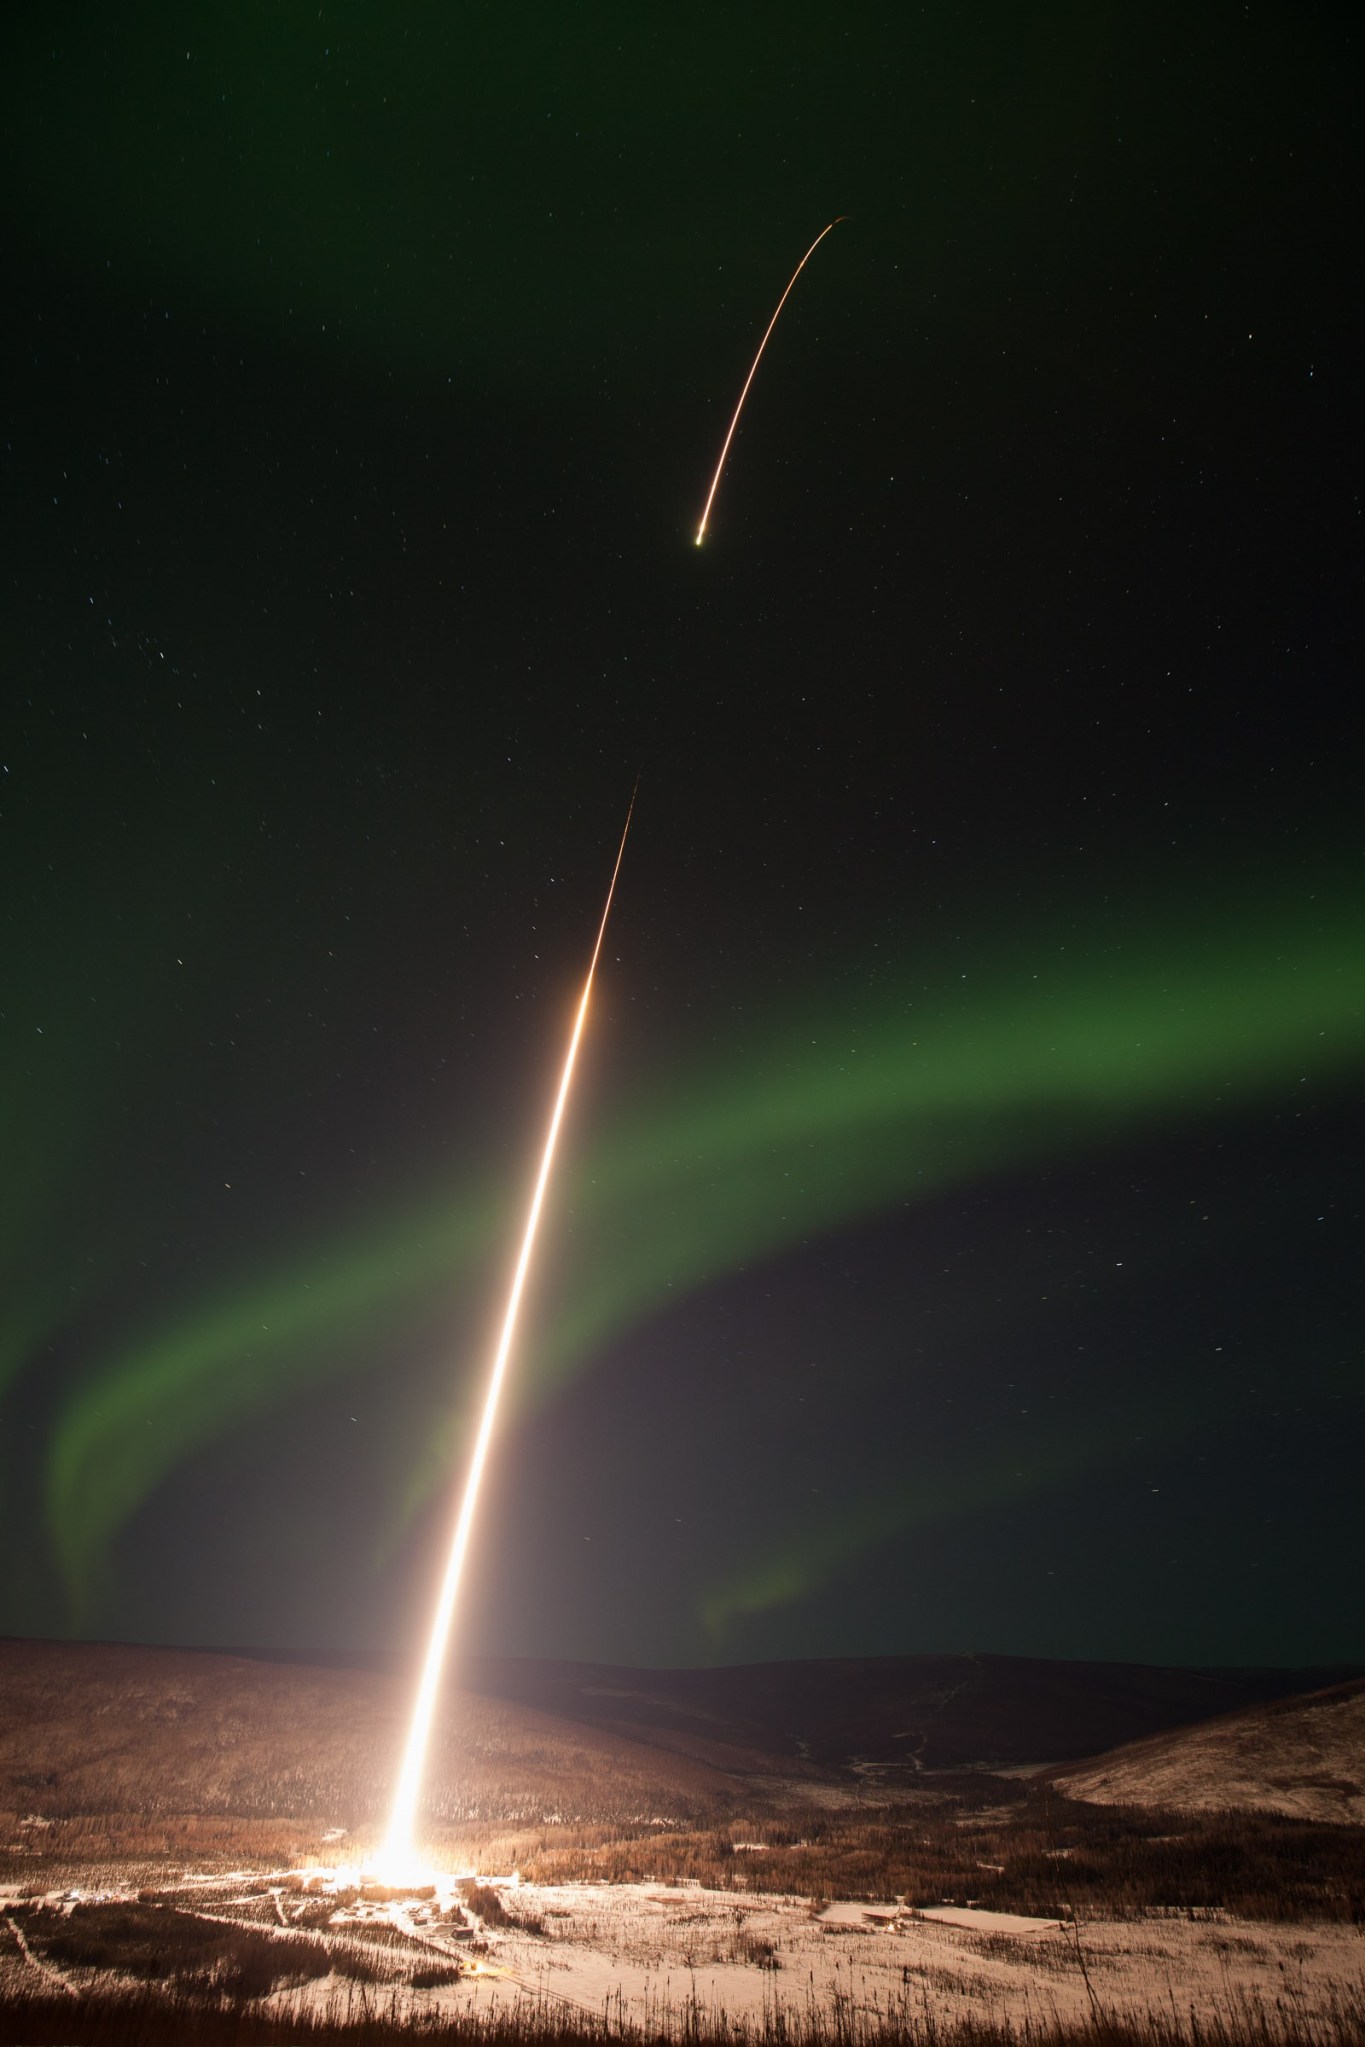 A long-exposure photograph of a souding rocket launch, represented by a white streak broken in the middle. A soft green aurora is in the background against a snowy landscape.